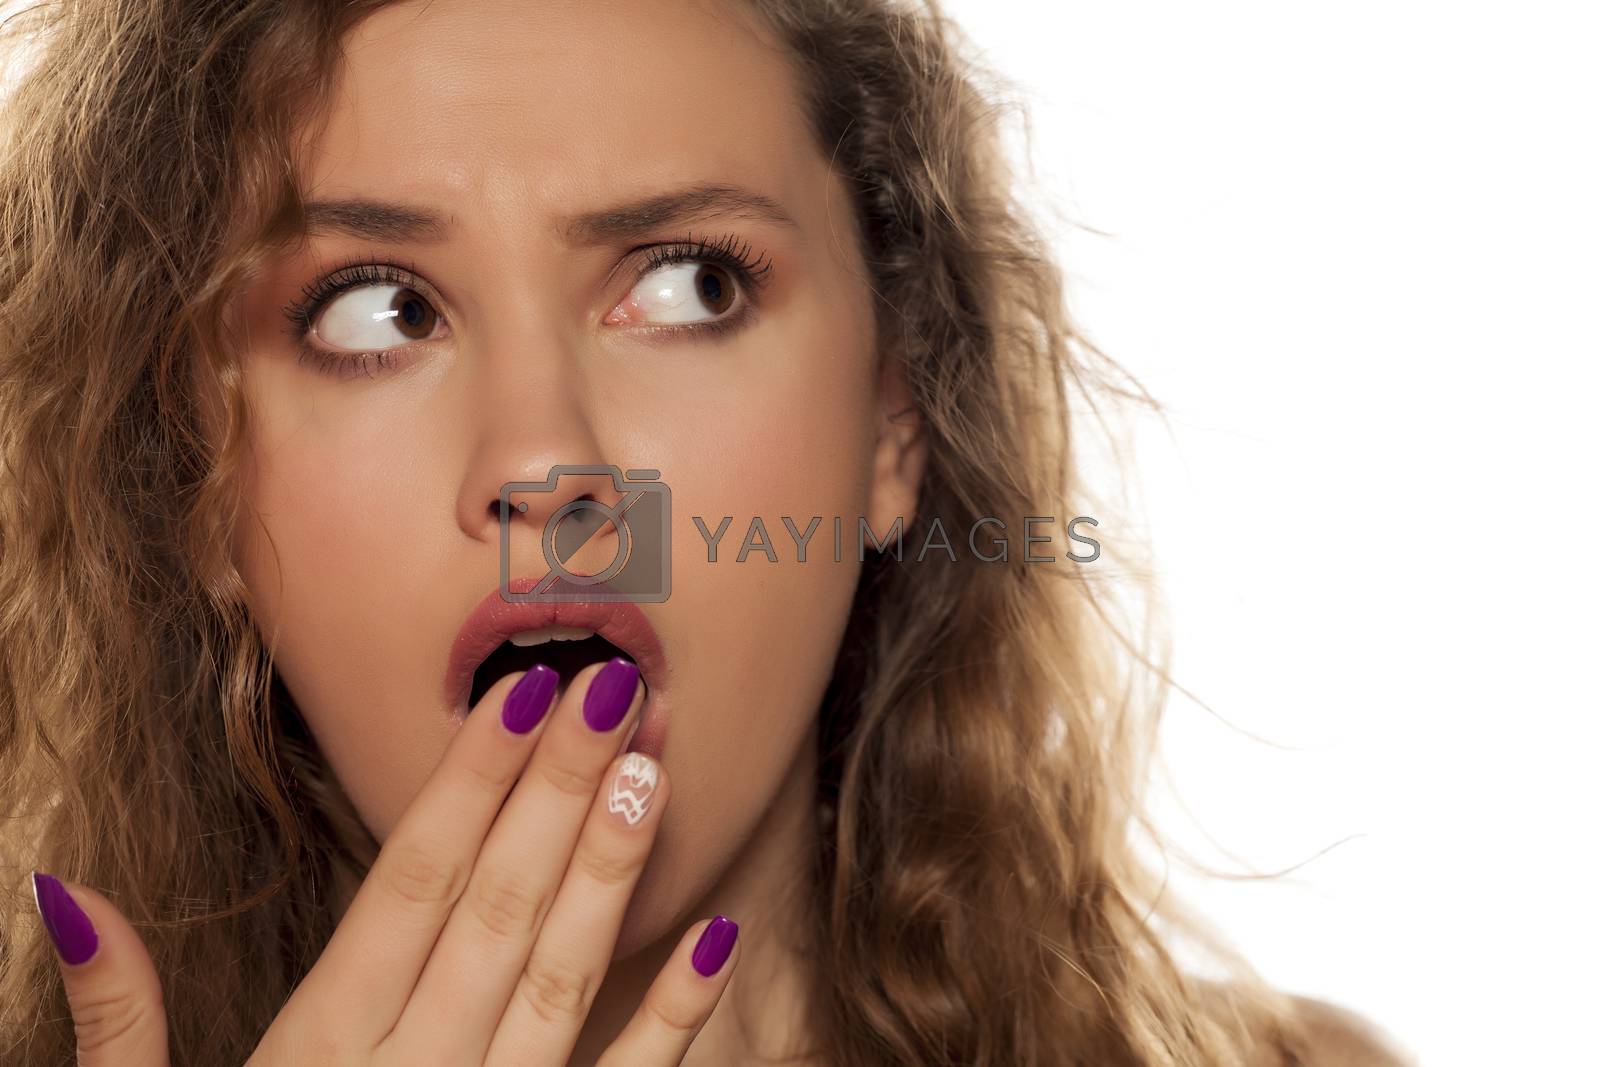 Royalty free image of shocked young woman by Vladimirfloyd